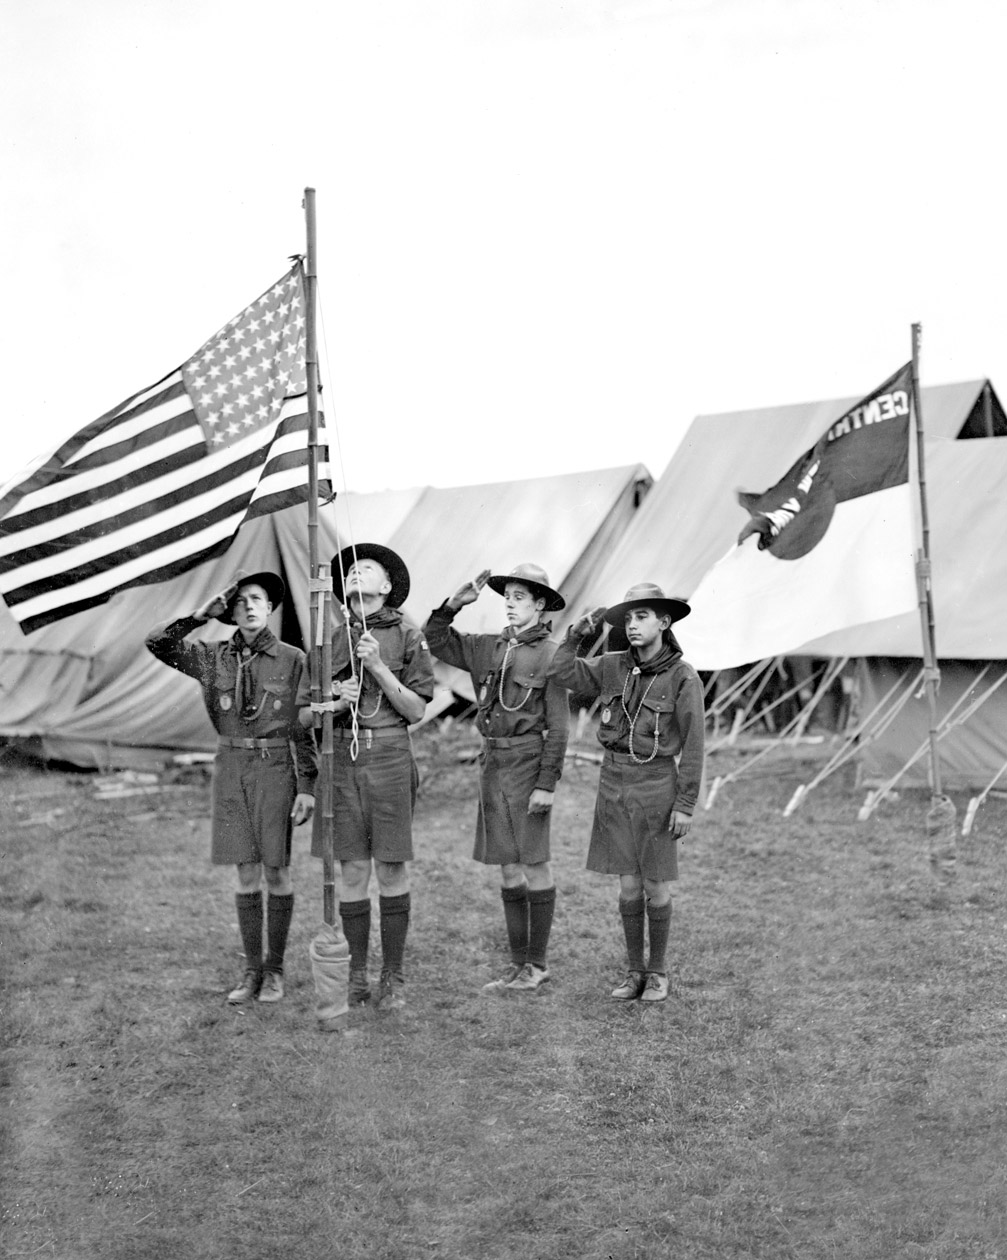 American boy scouts from New York, hauling up the American flag in front of their camp at Arrowe Park, Birkenhead in readiness for the International Scout Jamboree. United Kingdom, 1929.